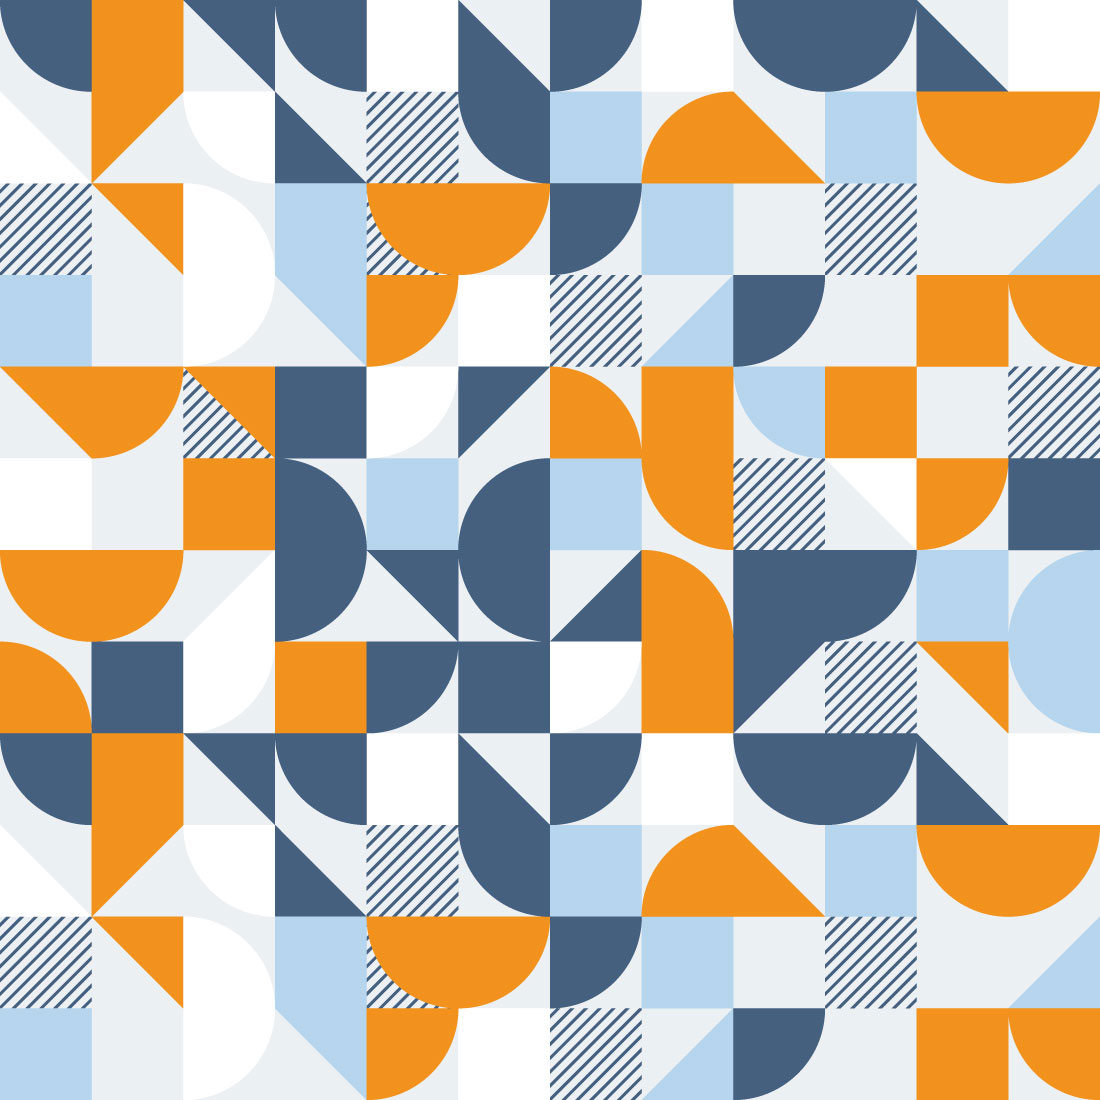 Geometric Tracery Seamless Patterns cover image.